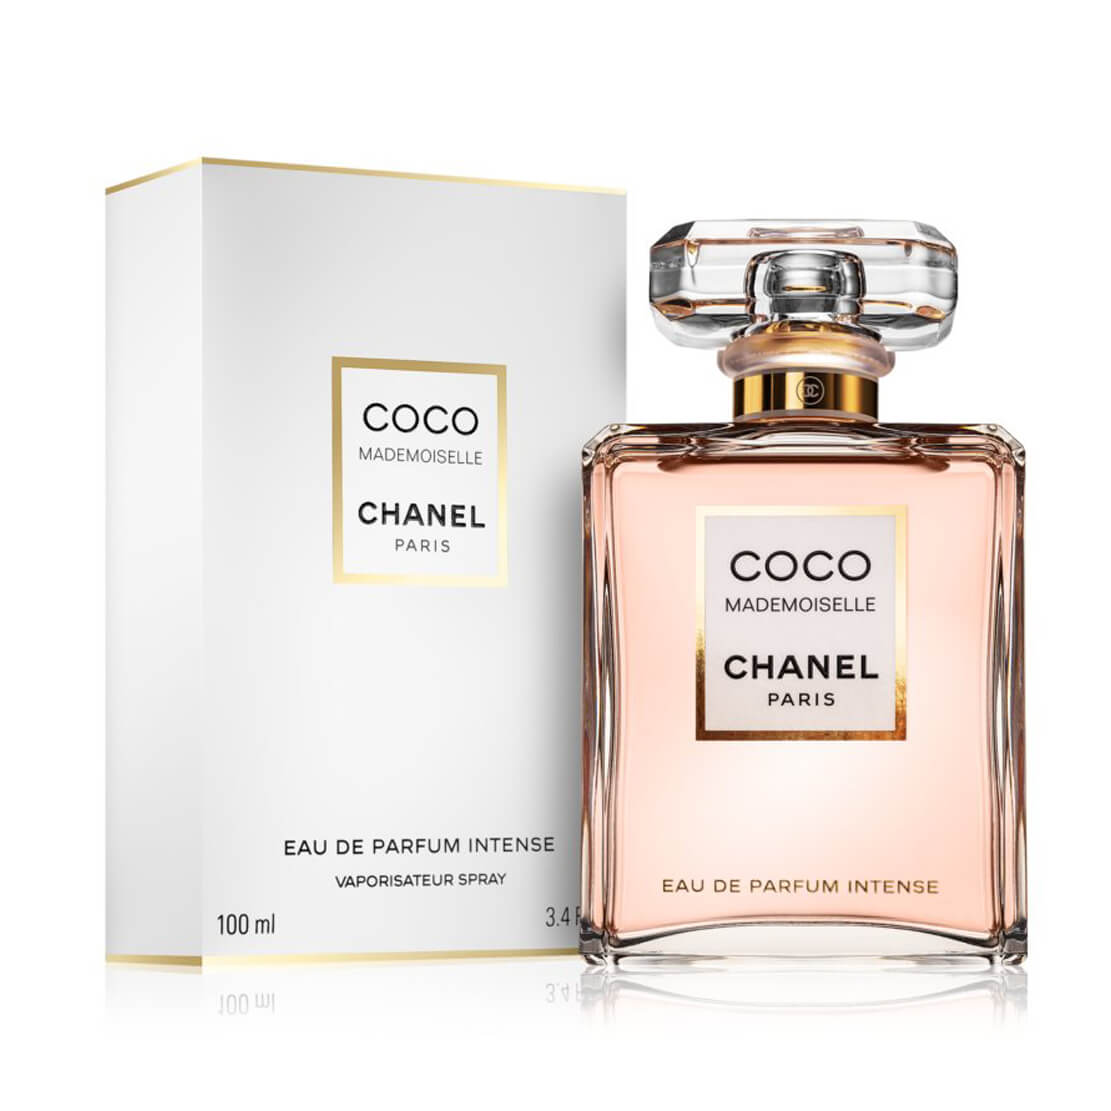 NEW! Coco Mademoiselle L'eau 🌬Fragrance Mist – Chanel 2021 Release